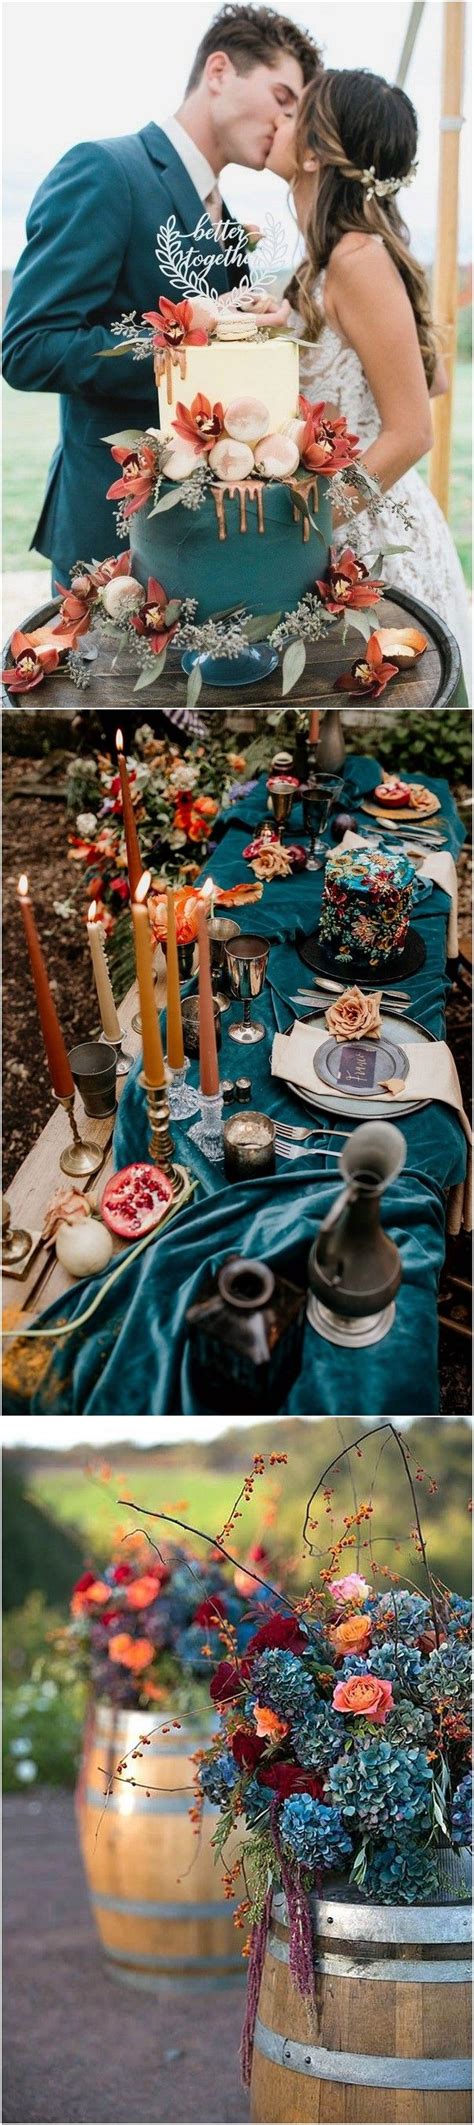 6 Perfect Dark Teal Wedding Color Schemes For Fall In 2020